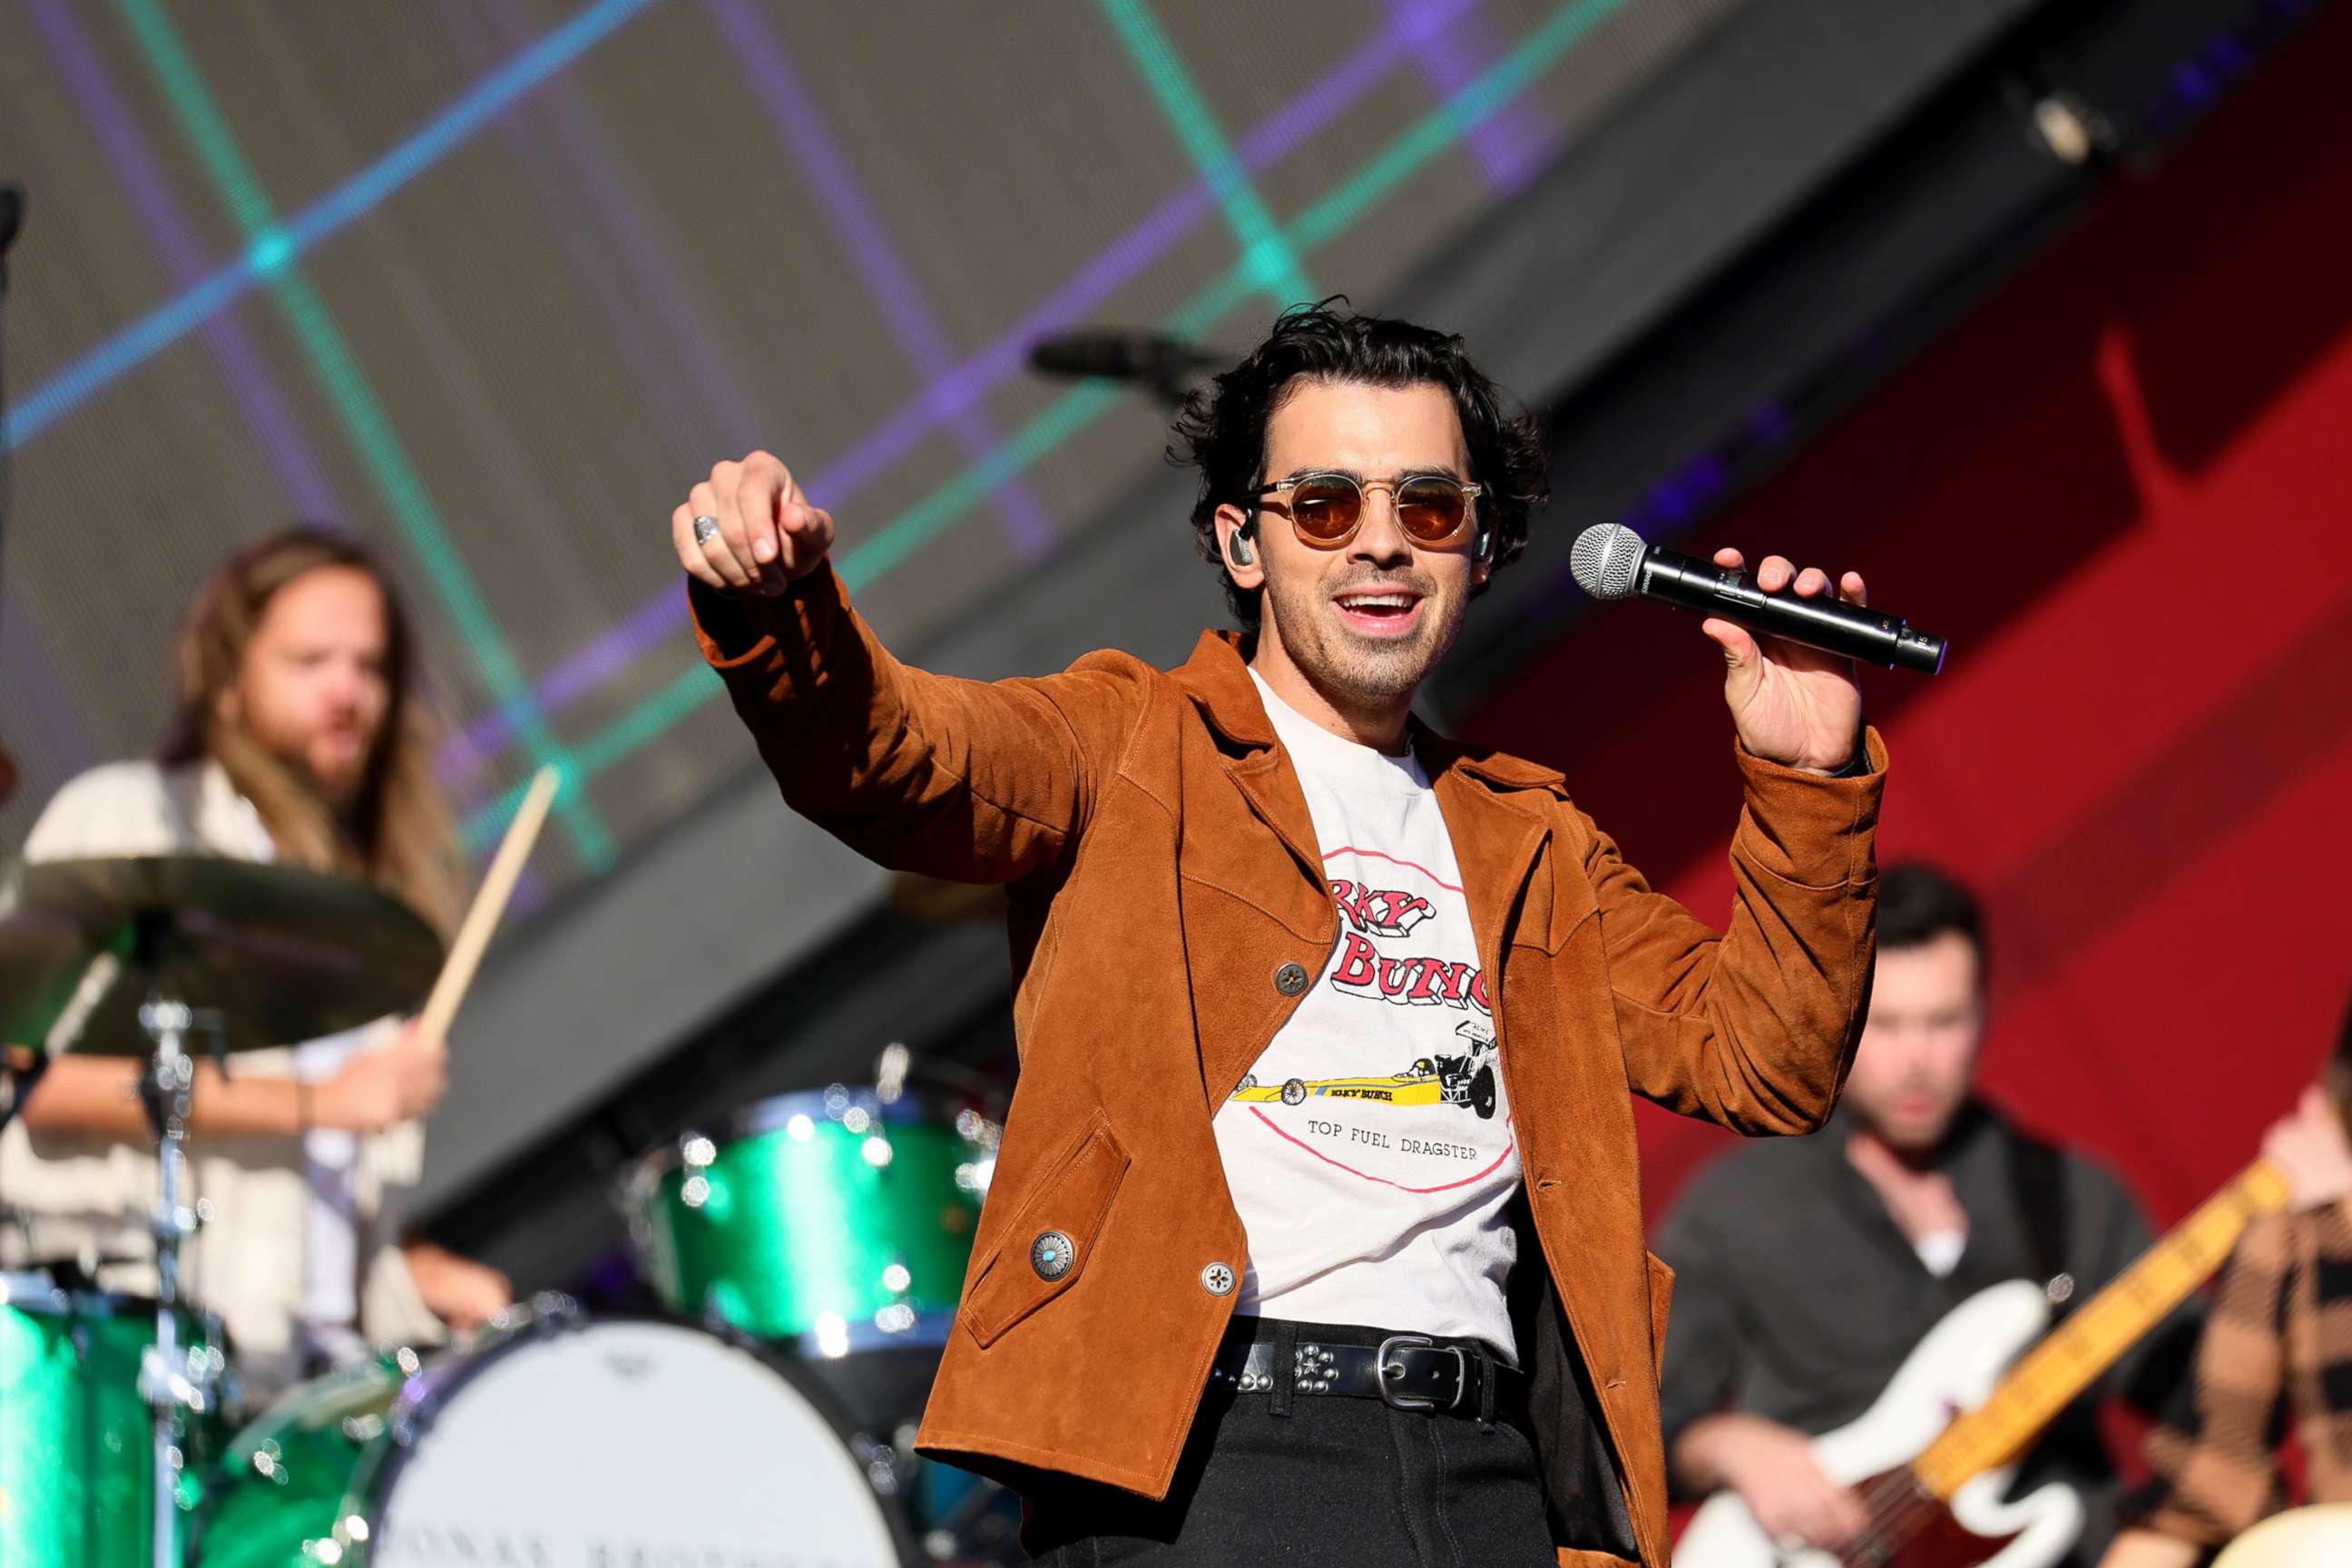 PHOTO: In this Sept. 24, 2022, file photo, Joe Jonas of the Jonas Brothers performs onstage during Global Citizen Festival 2022: New York at Central Park in New York.